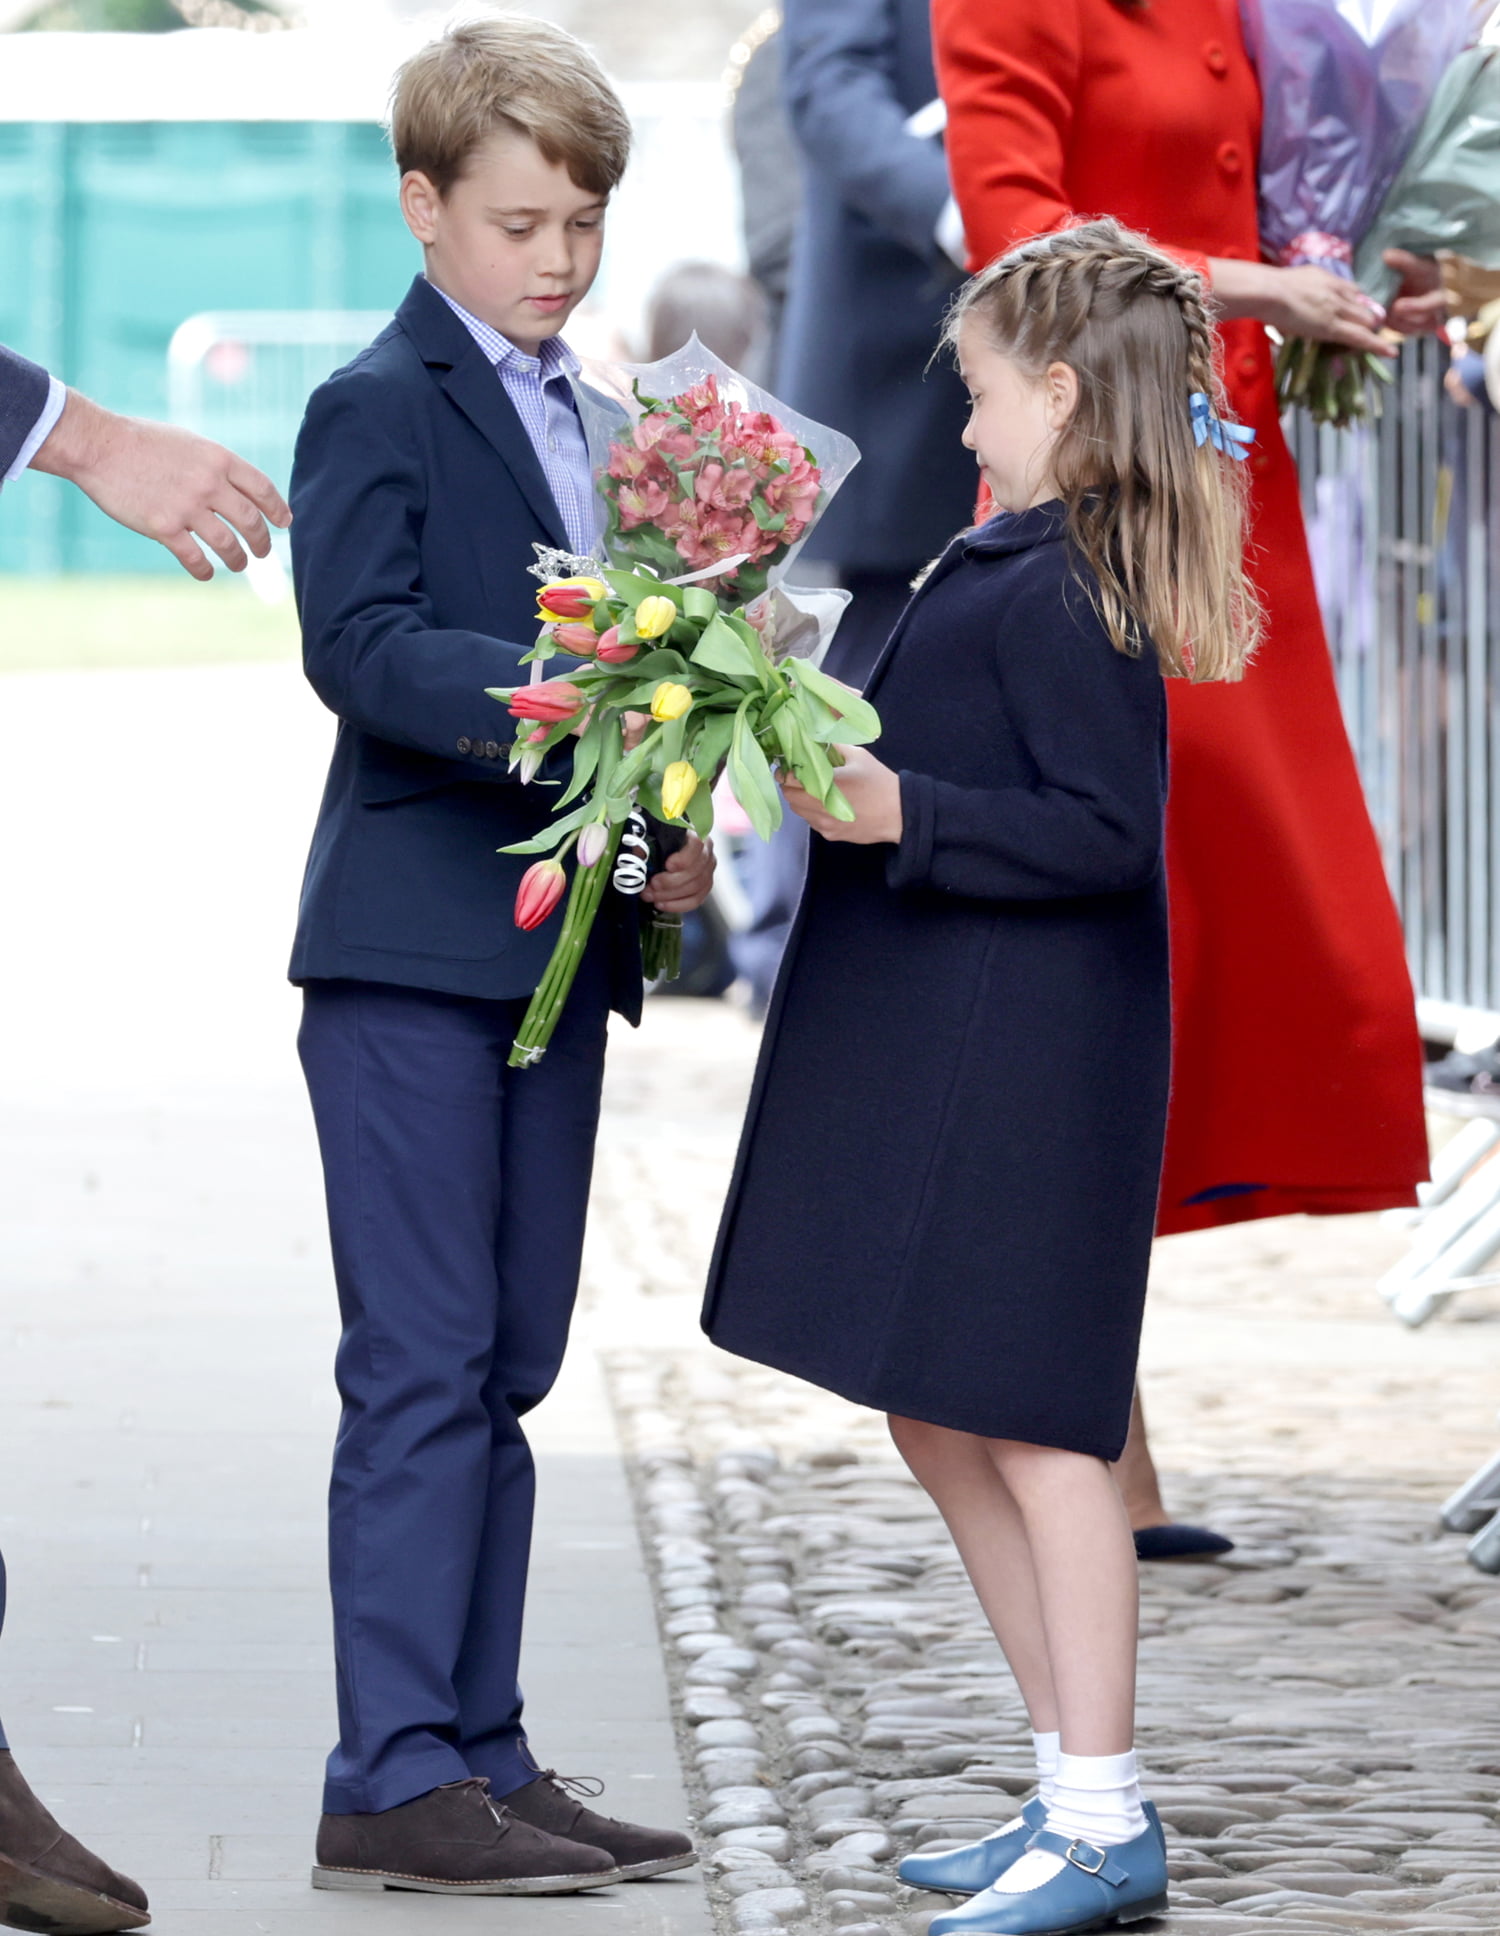 CARDIFF, WALES - JUNE 04: Prince George of Cambridge and Princess Charlotte of Cambridge hold gifts of flowers during a visit to Cardiff Castle on June 04, 2022 in Cardiff, Wales. The Platinum Jubilee of Elizabeth II is being celebrated from June 2 to June 5, 2022, in the UK and Commonwealth to mark the 70th anniversary of the accession of Queen Elizabeth II on 6 February 1952. 